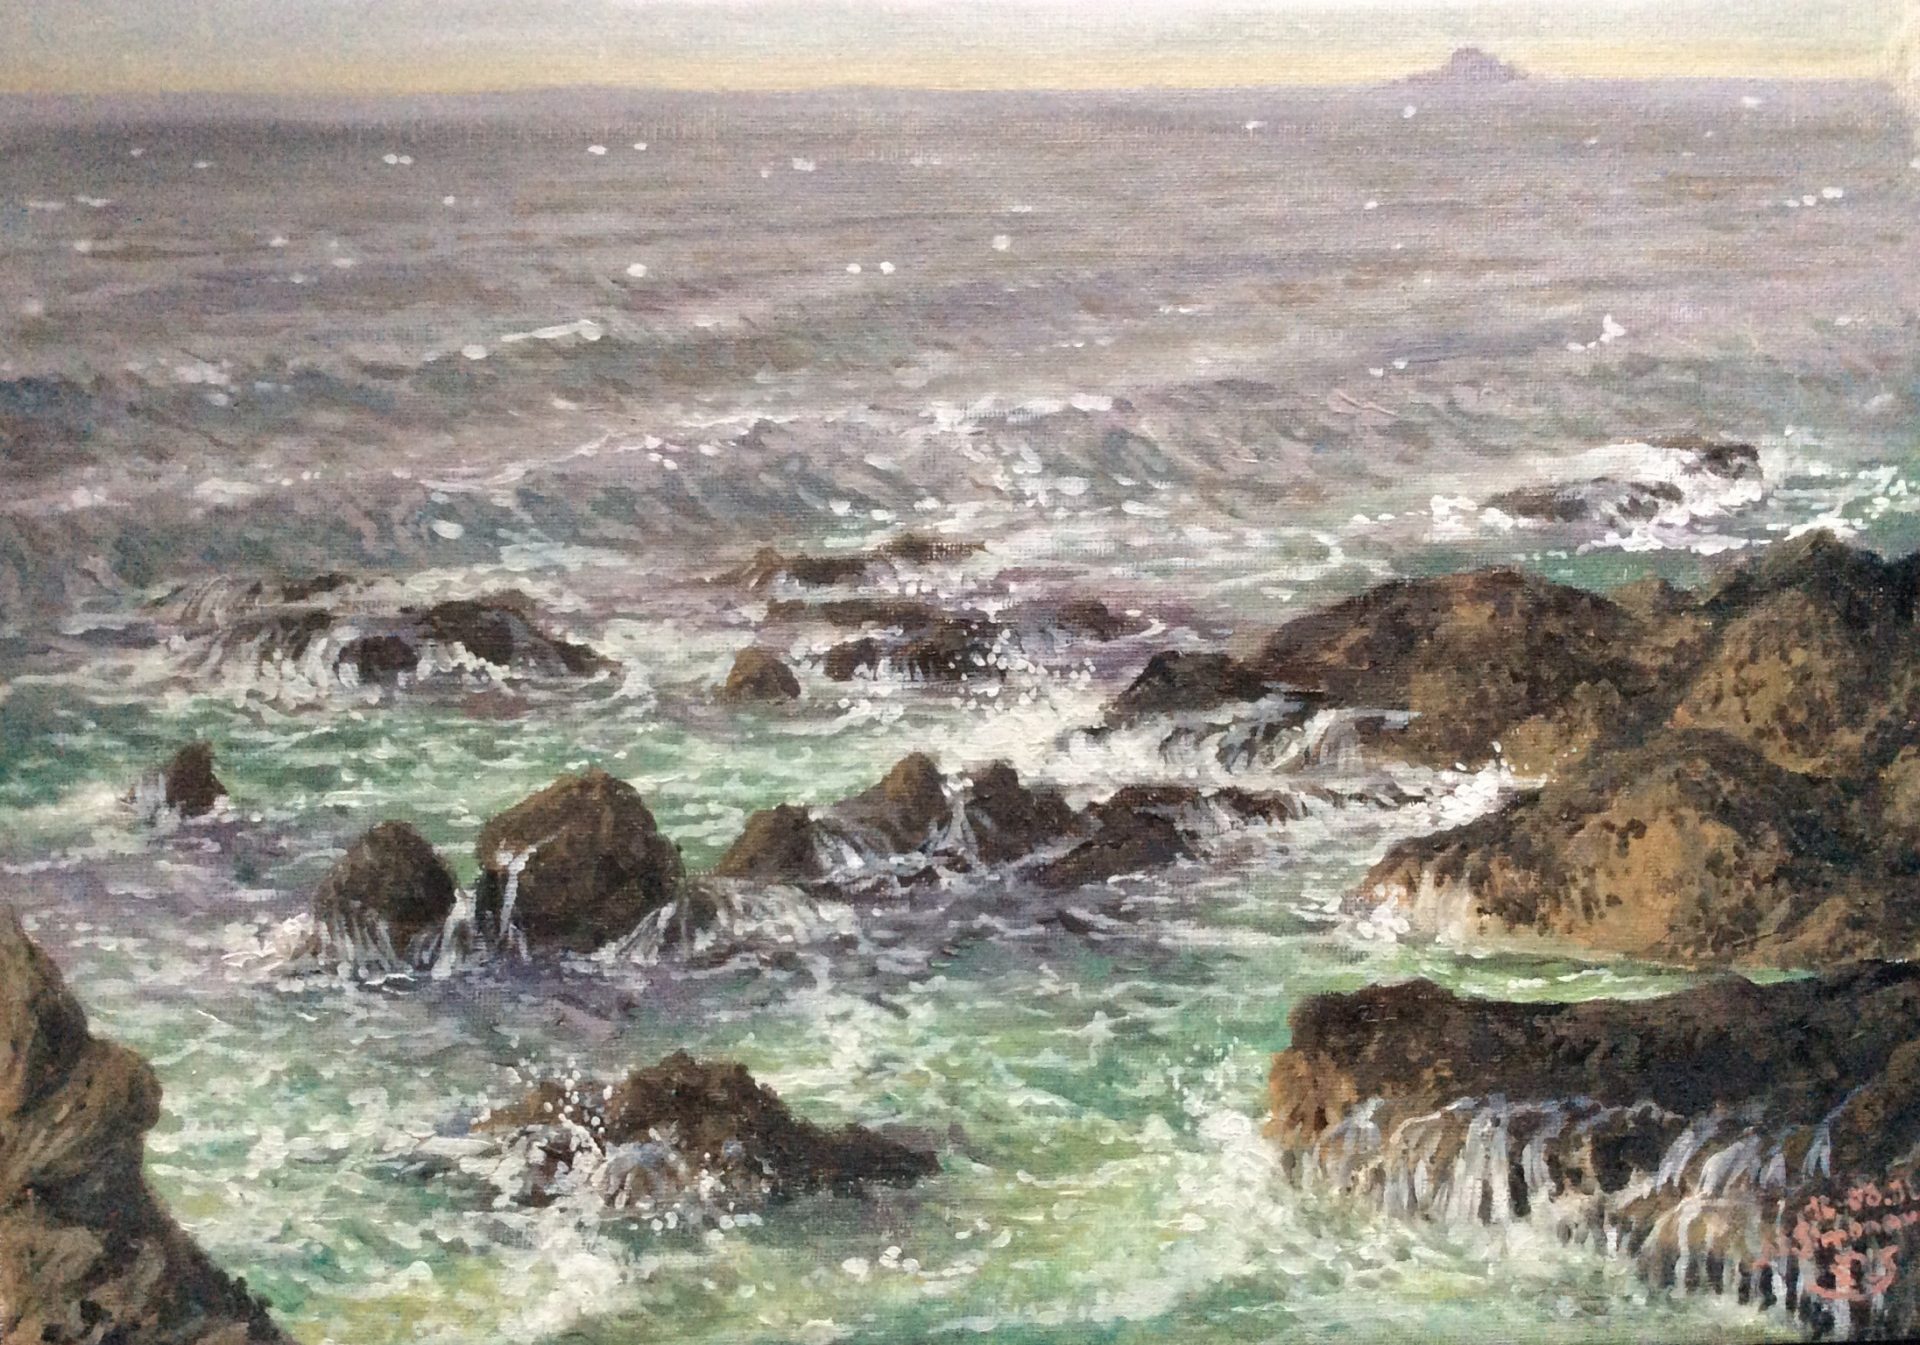 Rough Seaside, Cornwall Oil on Canvas, (30cm by 42cm) £420